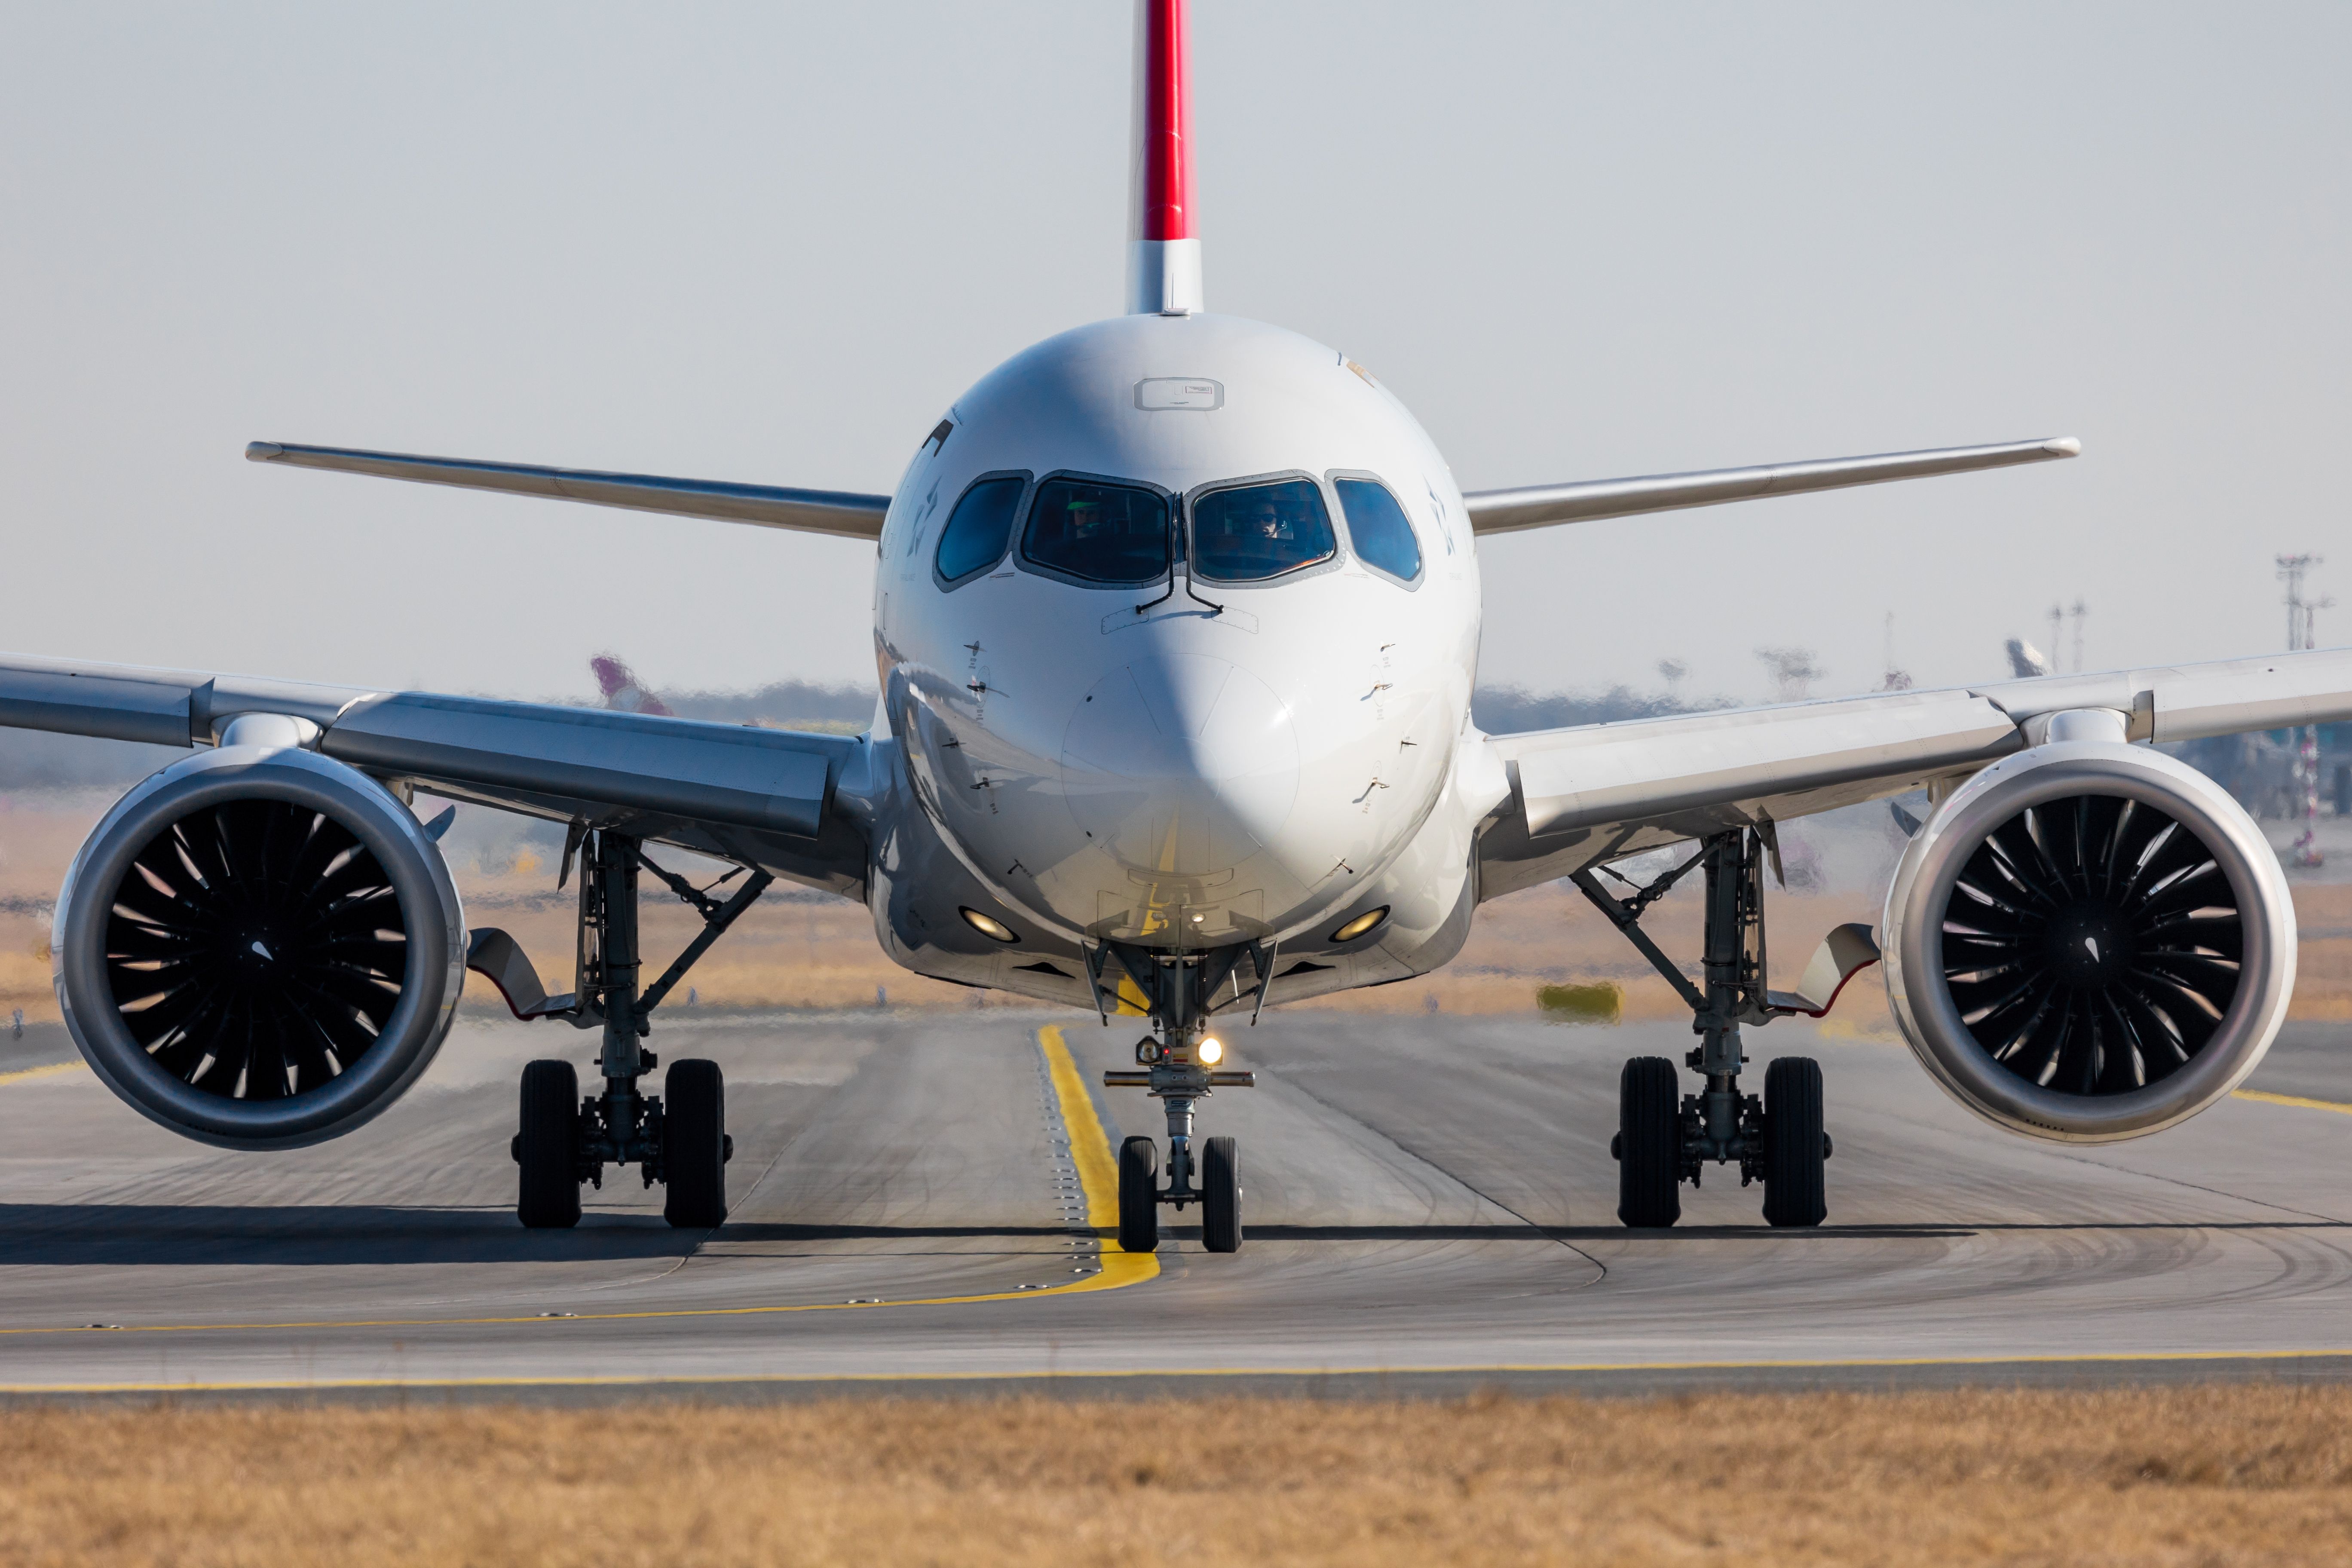 A head-on view of an Airbus A220.